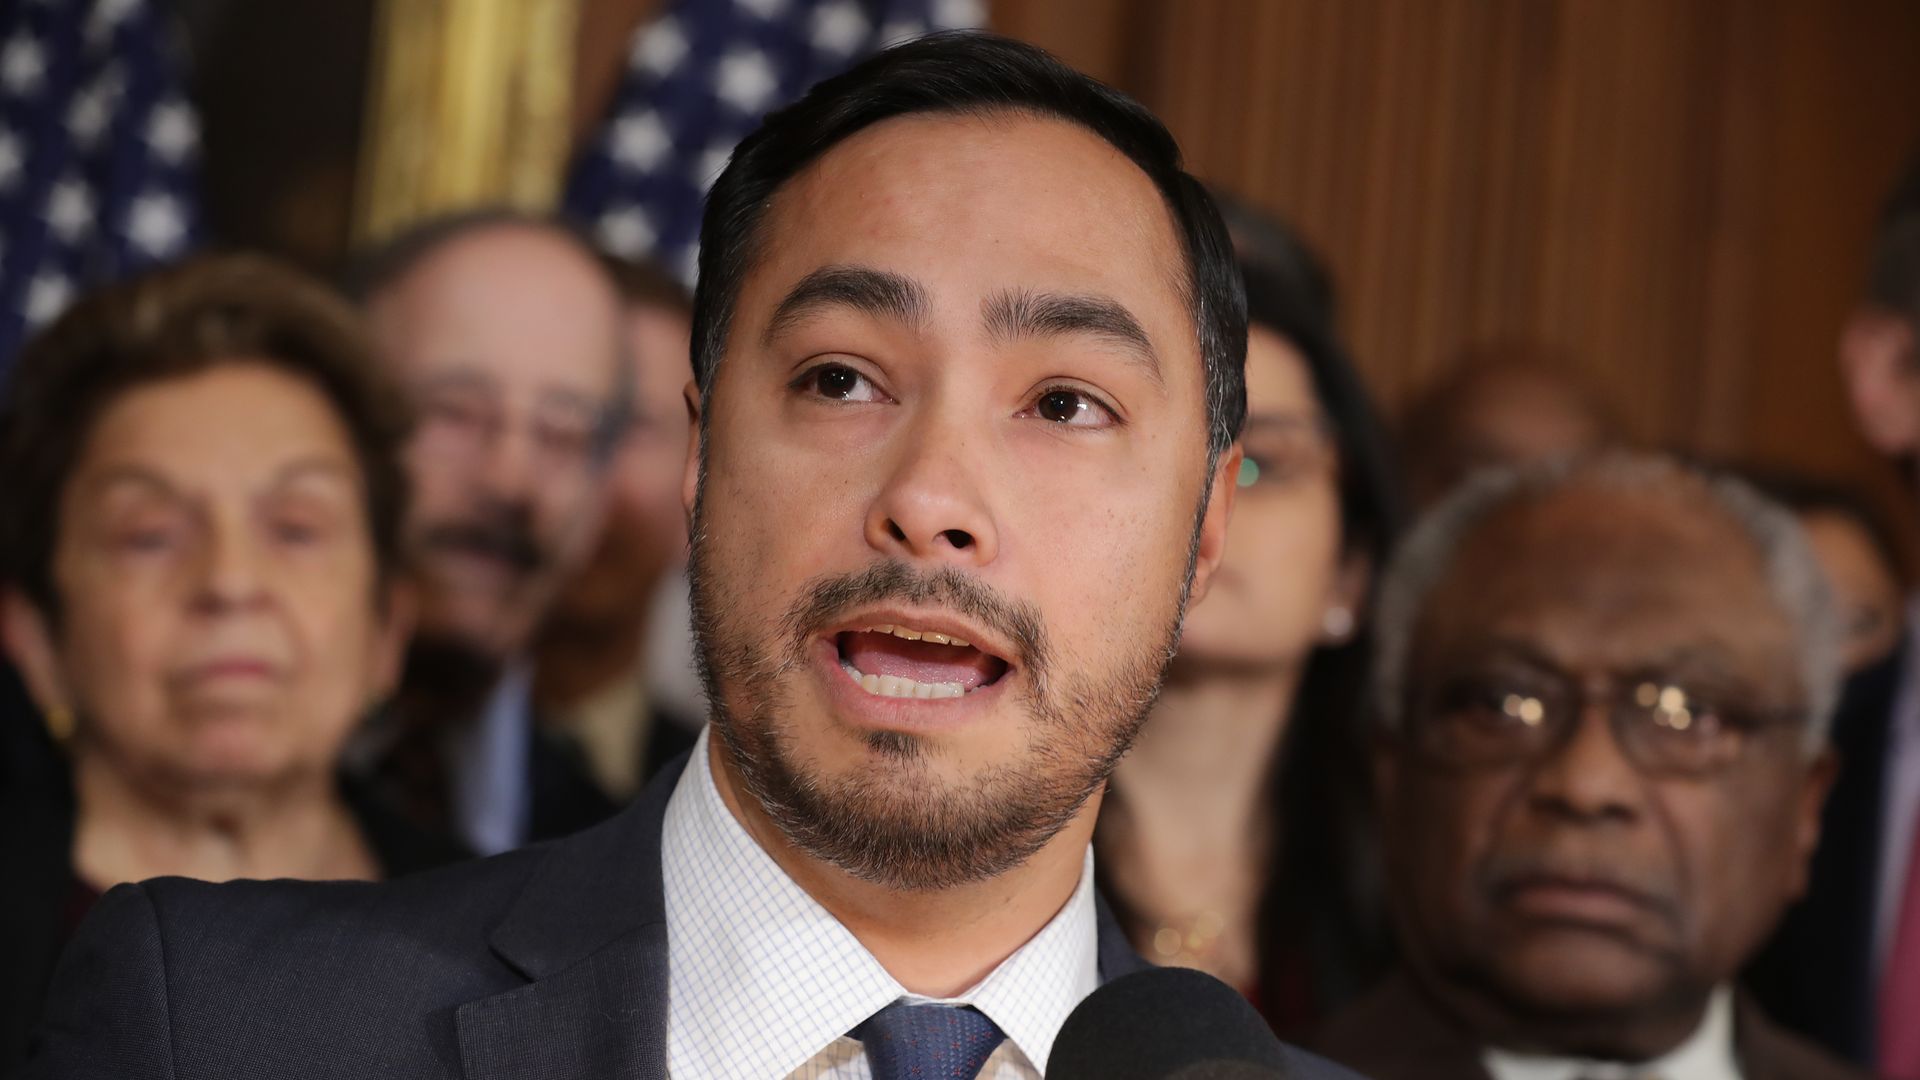  Rep. Joaquin Castro (D-TX) speaks during a news conference about the resolution he has sponsored to terminate President Donald Trump's emergency declaration February 25, 2019 in Washington, DC. 